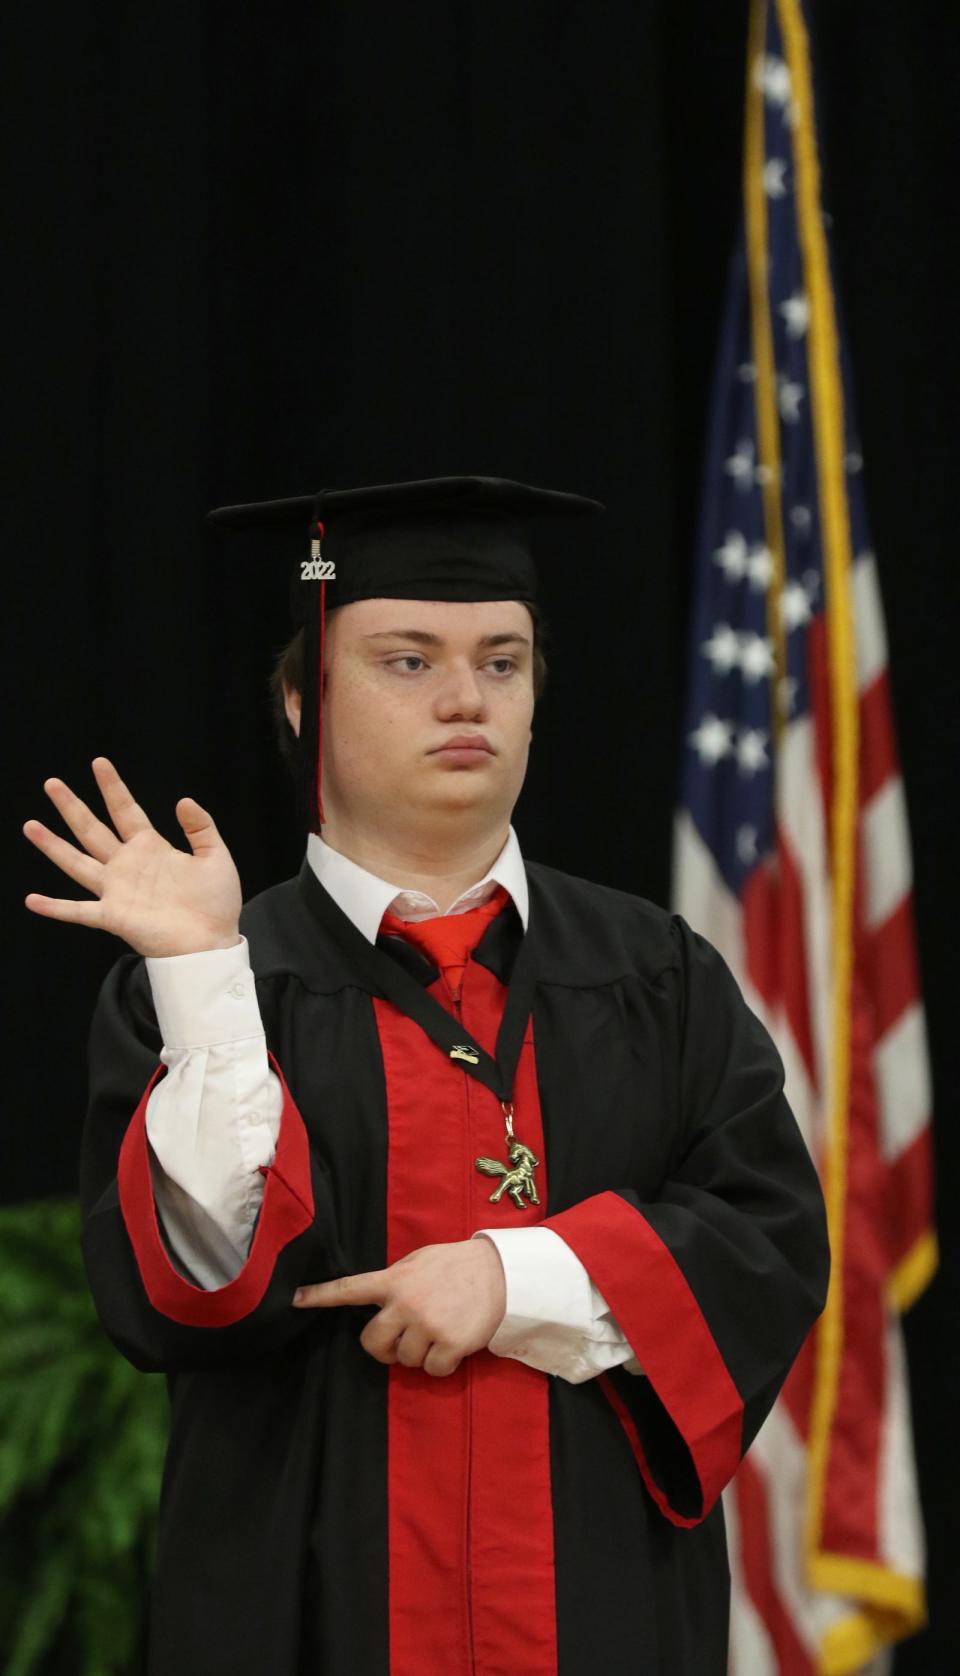 William Jones takes part on stage during the “Star Spangled Banner” during the North Shelby Graduation Ceremony held Friday morning, May 20, 2022, at the North Shelby school in Shelby.